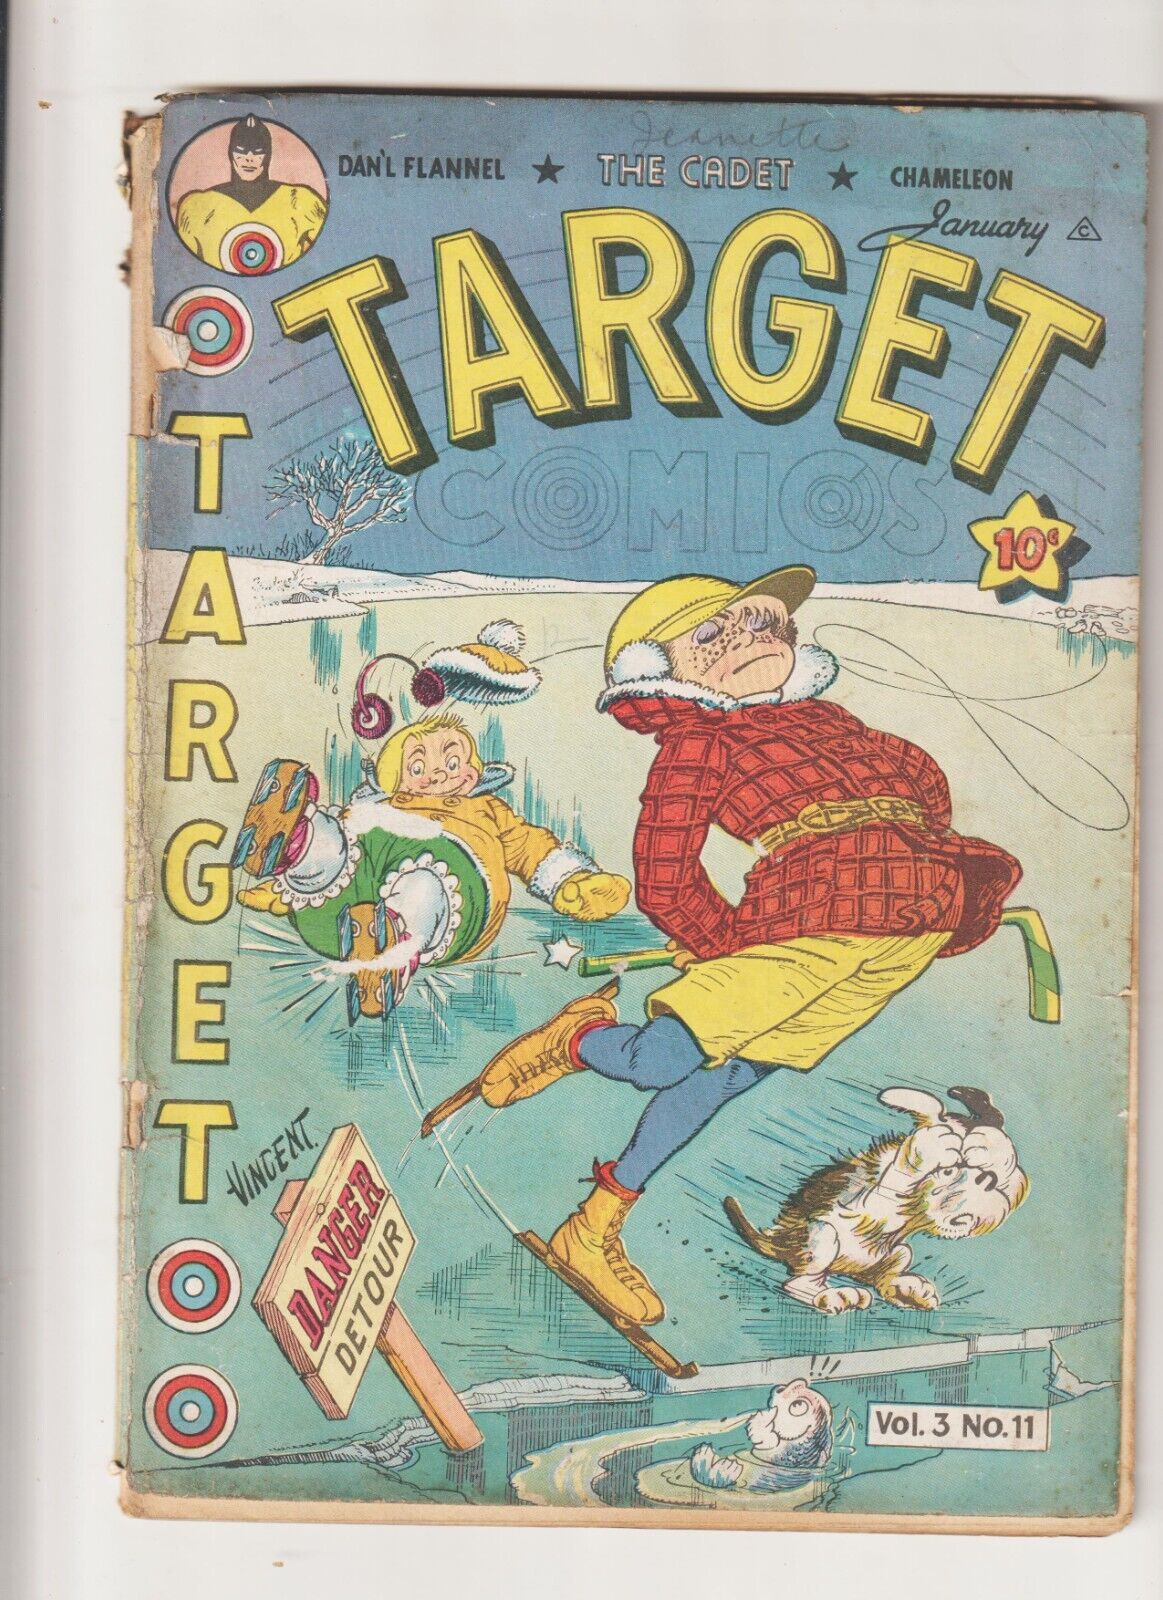 Target Comics v3#11  (35)  1943 WWII STORIES, / Target and the Targeteers